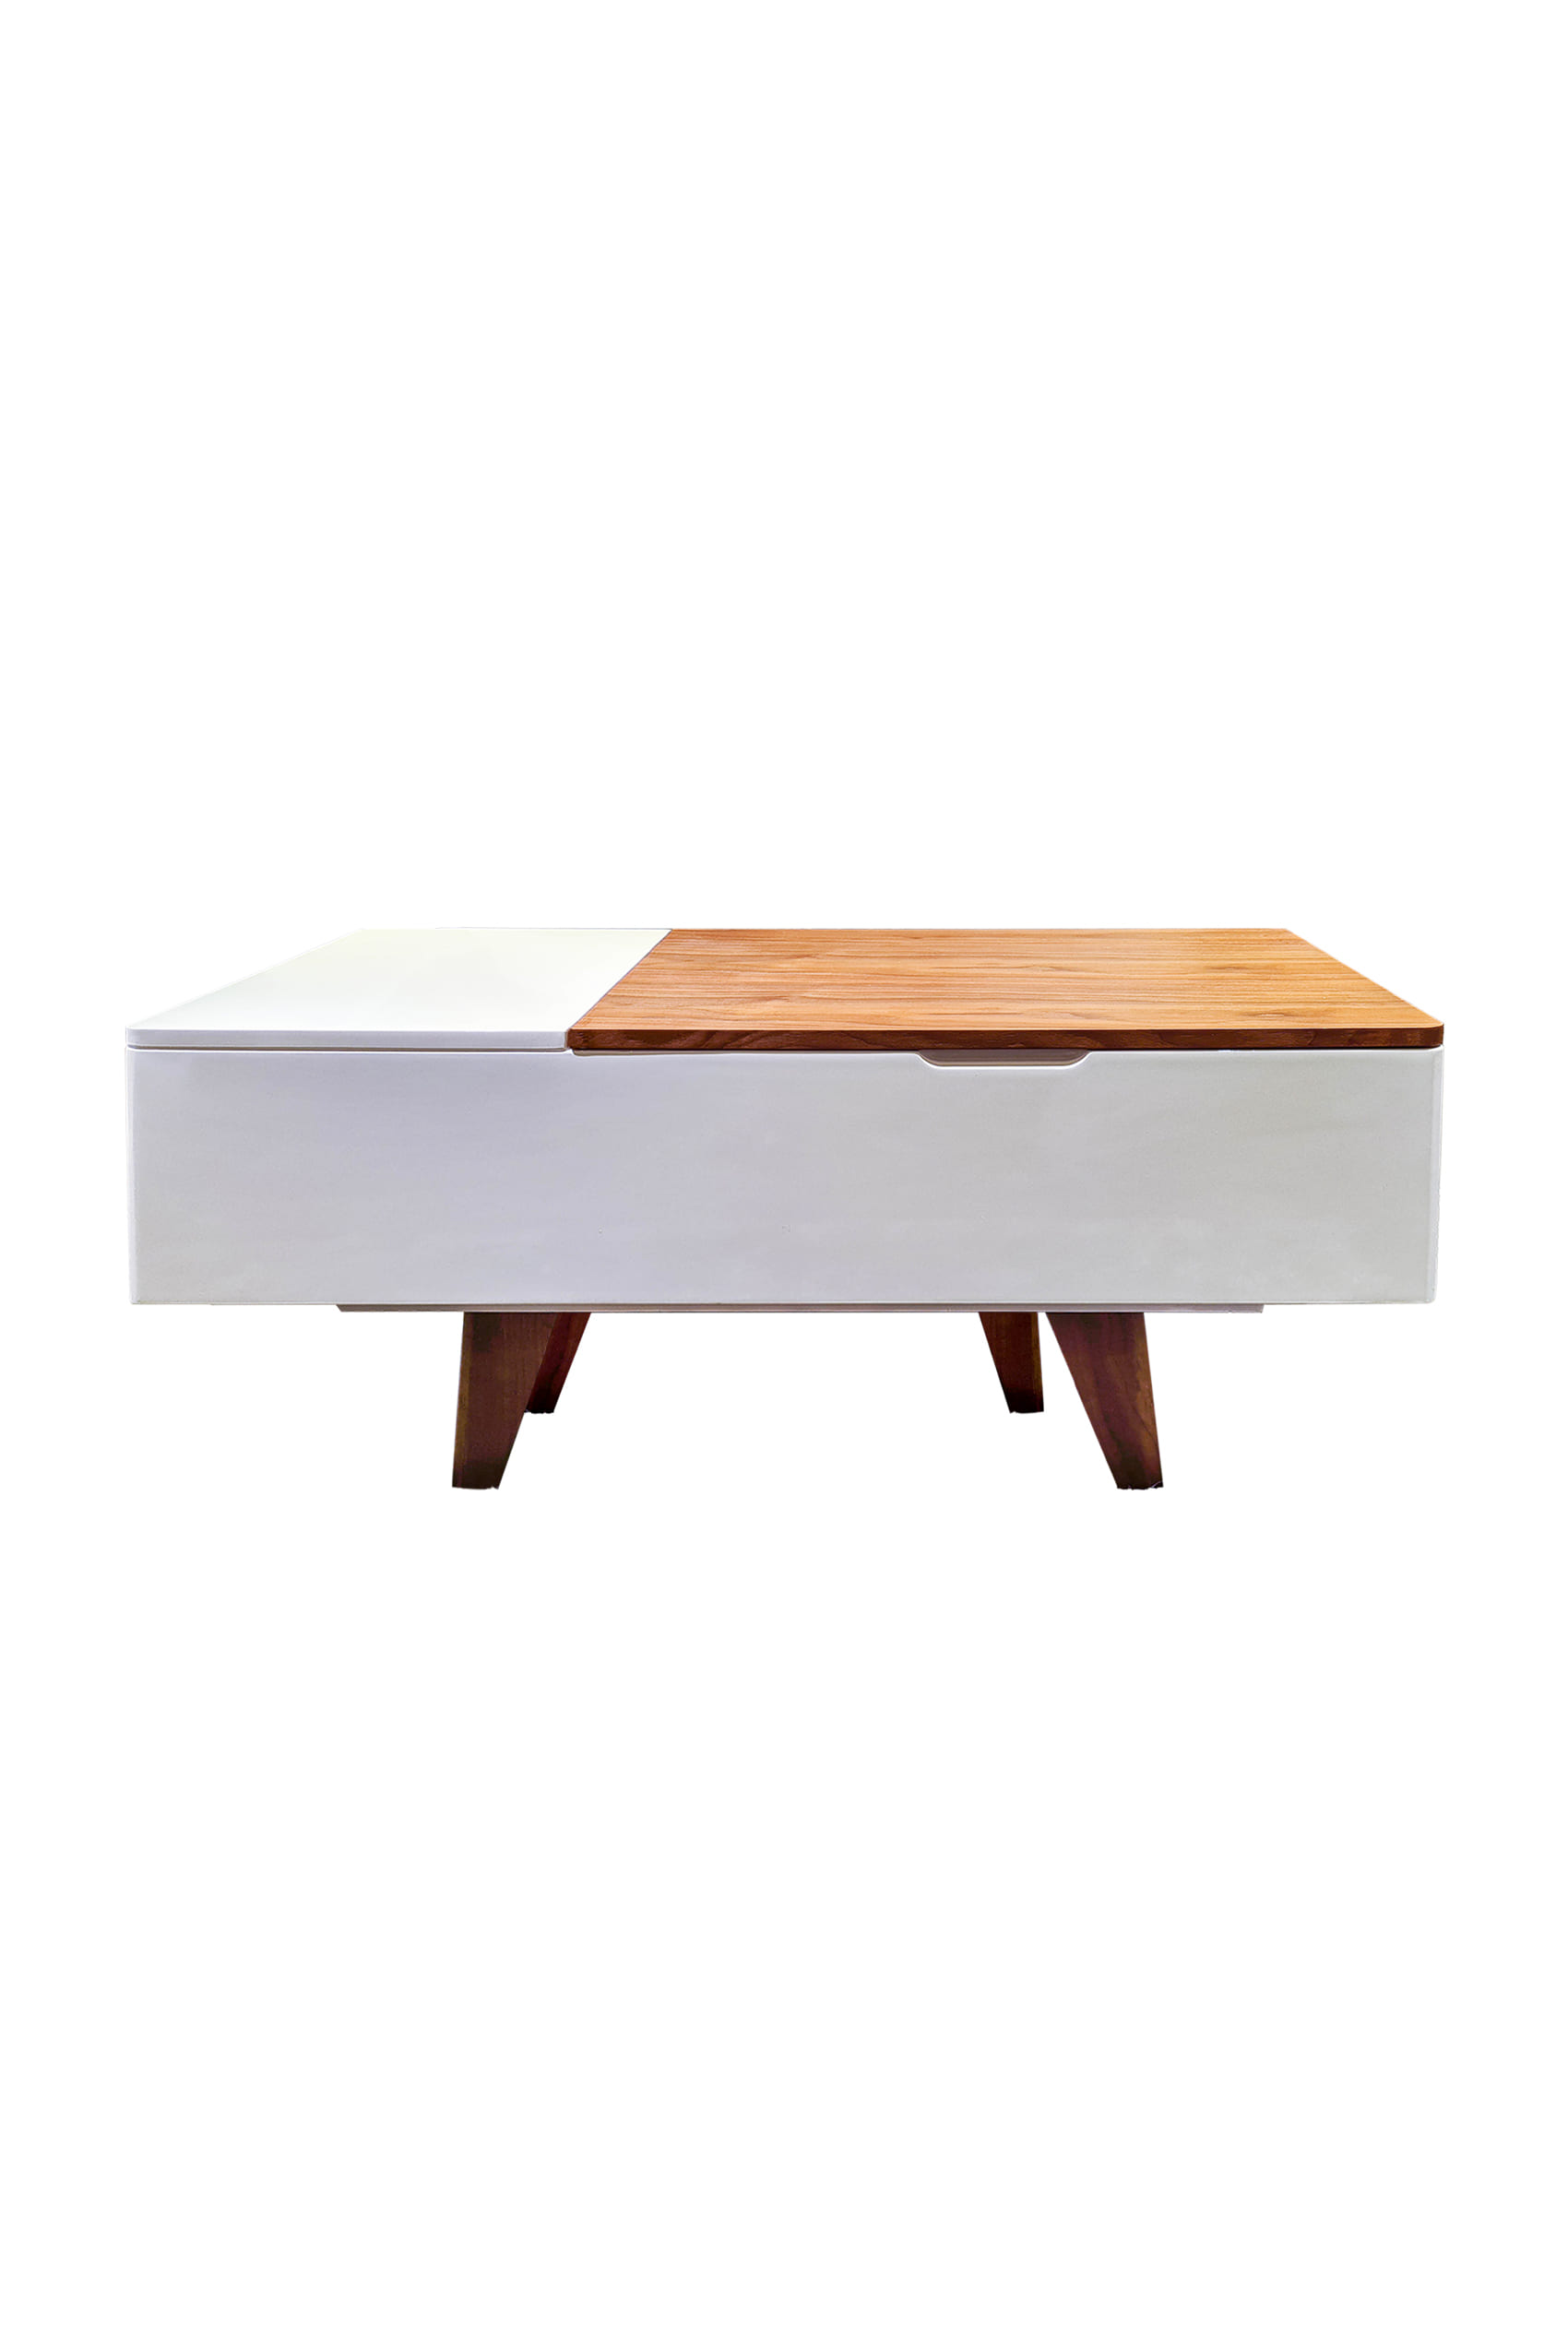 Double High Coffee Table